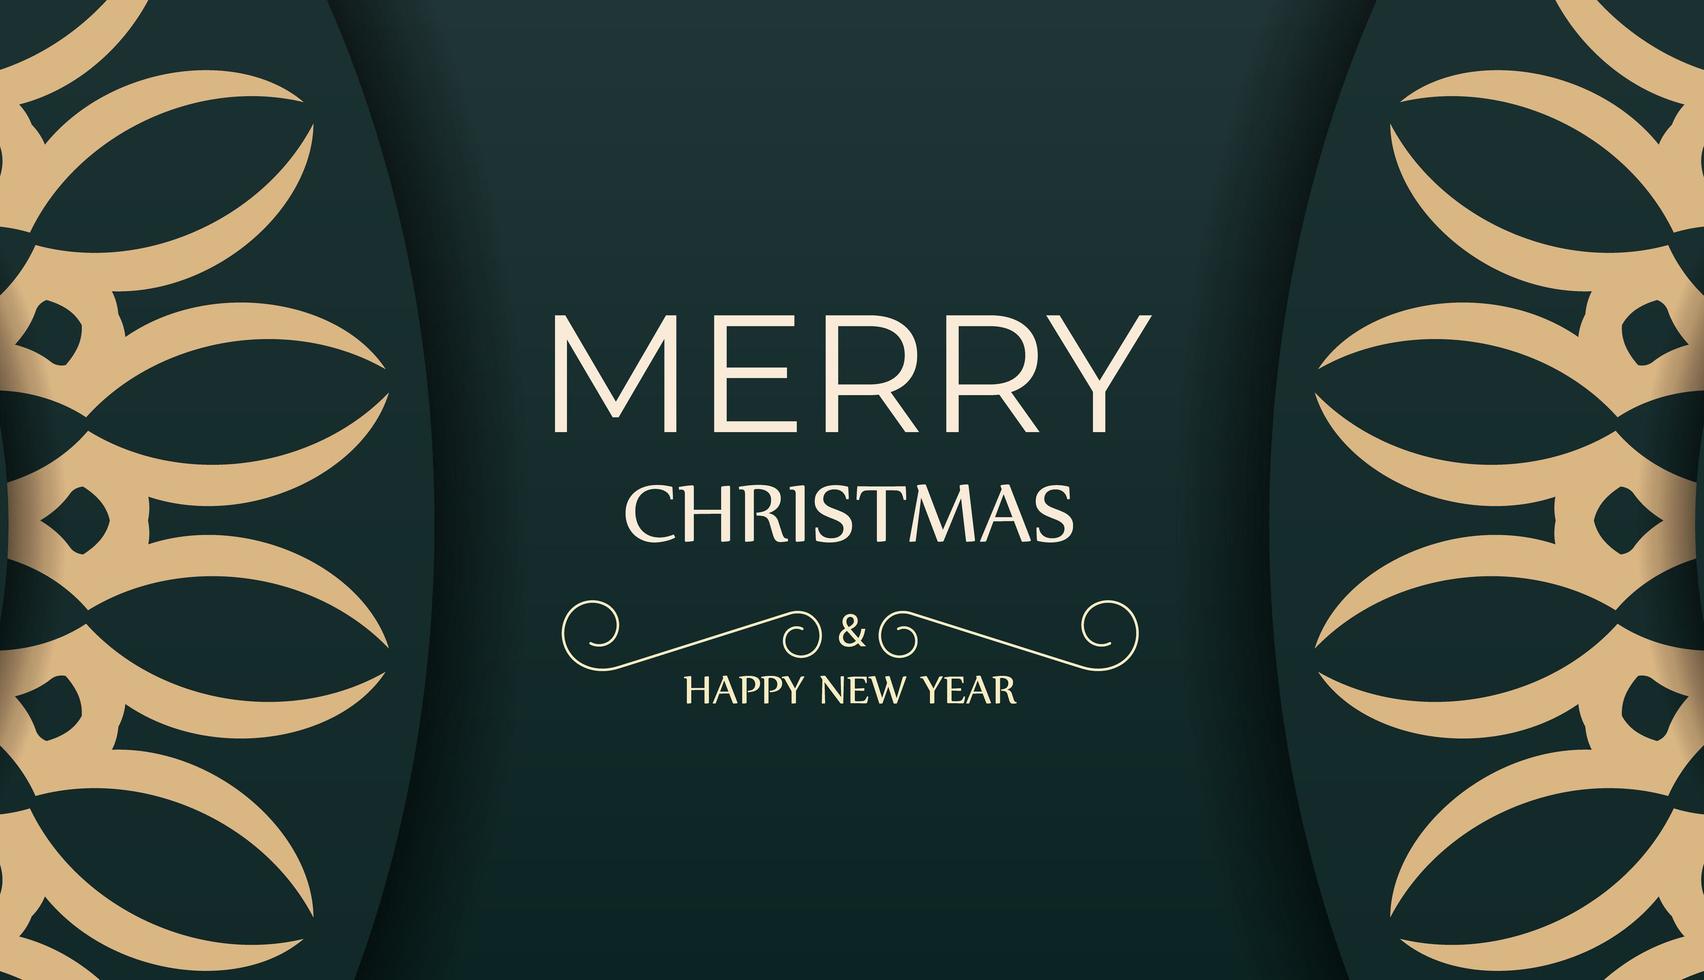 Festive Brochure Merry Christmas and Happy New Year in dark green color with abstract yellow pattern vector